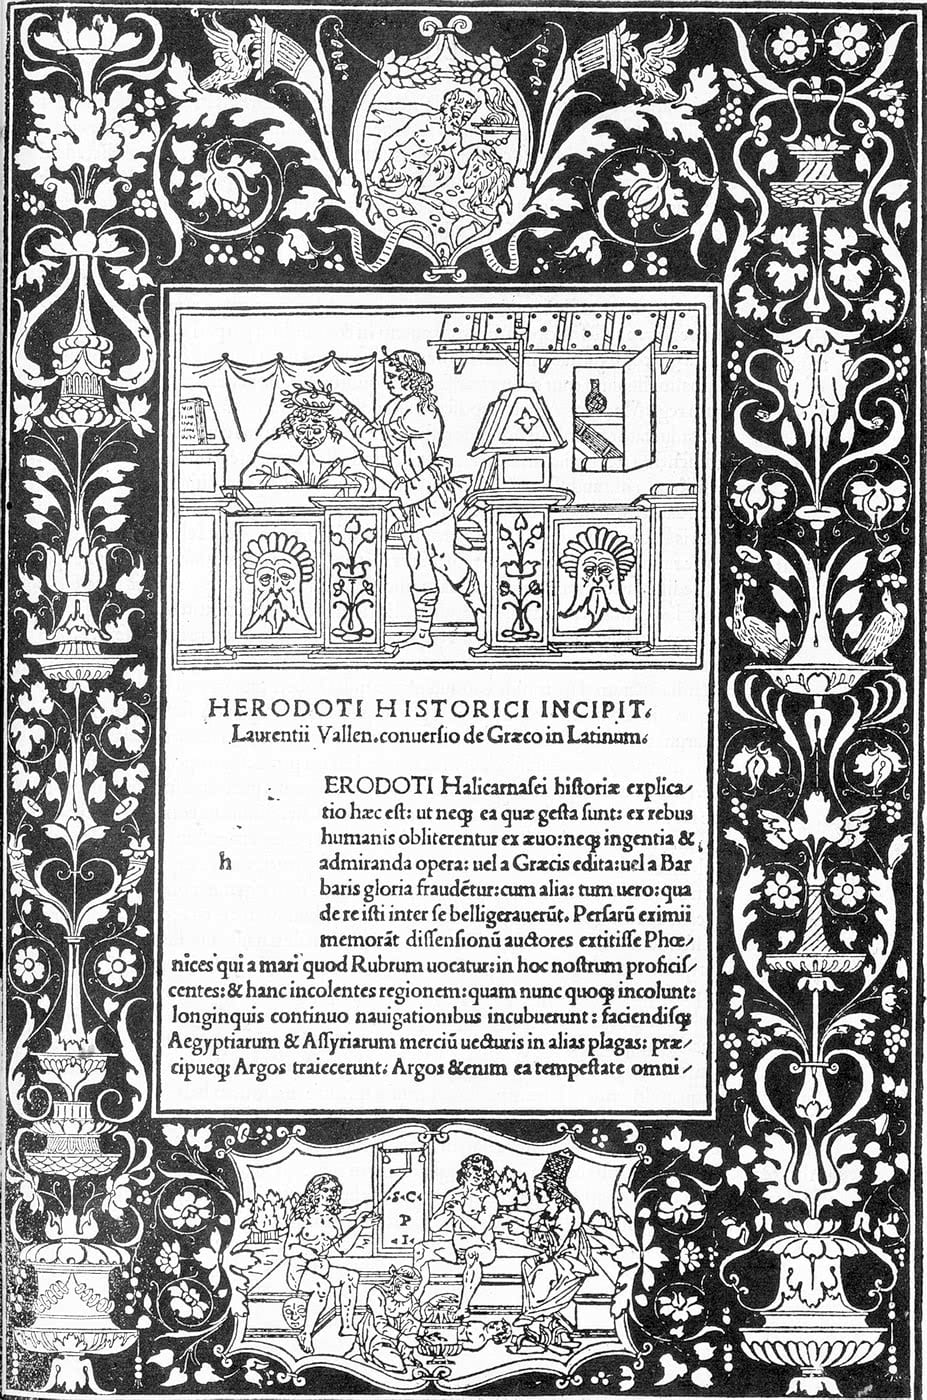 Dedication page for the Historiae by the Greek historian Herodotus, translated into Latin by Lorenzo Valla (1494)